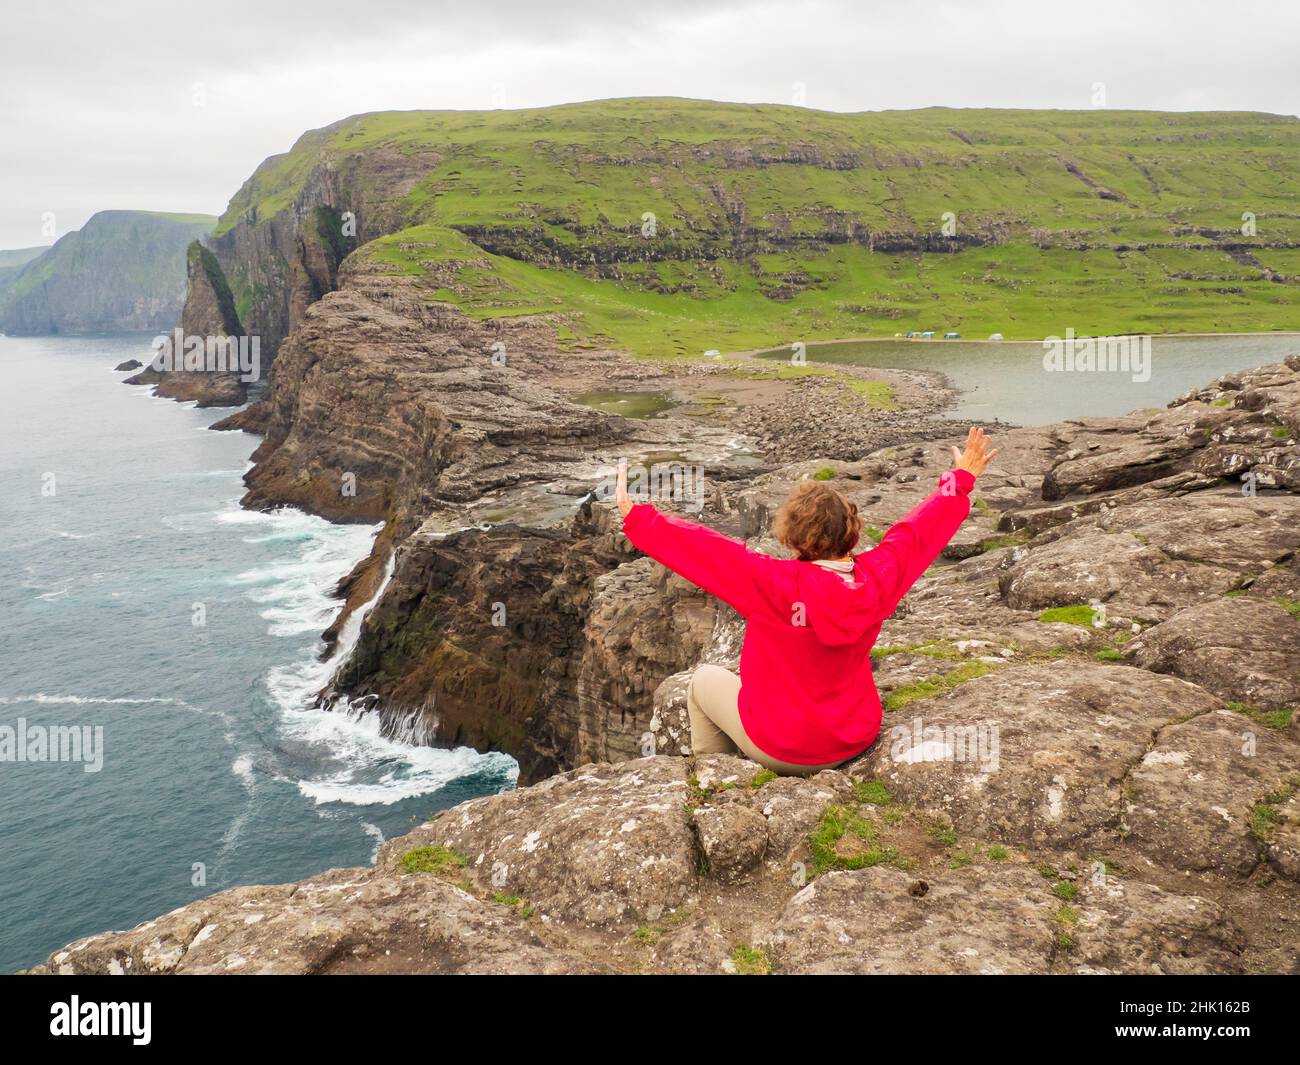 A tourist in a red jacket sits on a rocky shore above the Bøsdalafossur Waterfall, which flows from Lake Sørvágsvatn / Leitisvatn into the Atlantic Oc Stock Photo